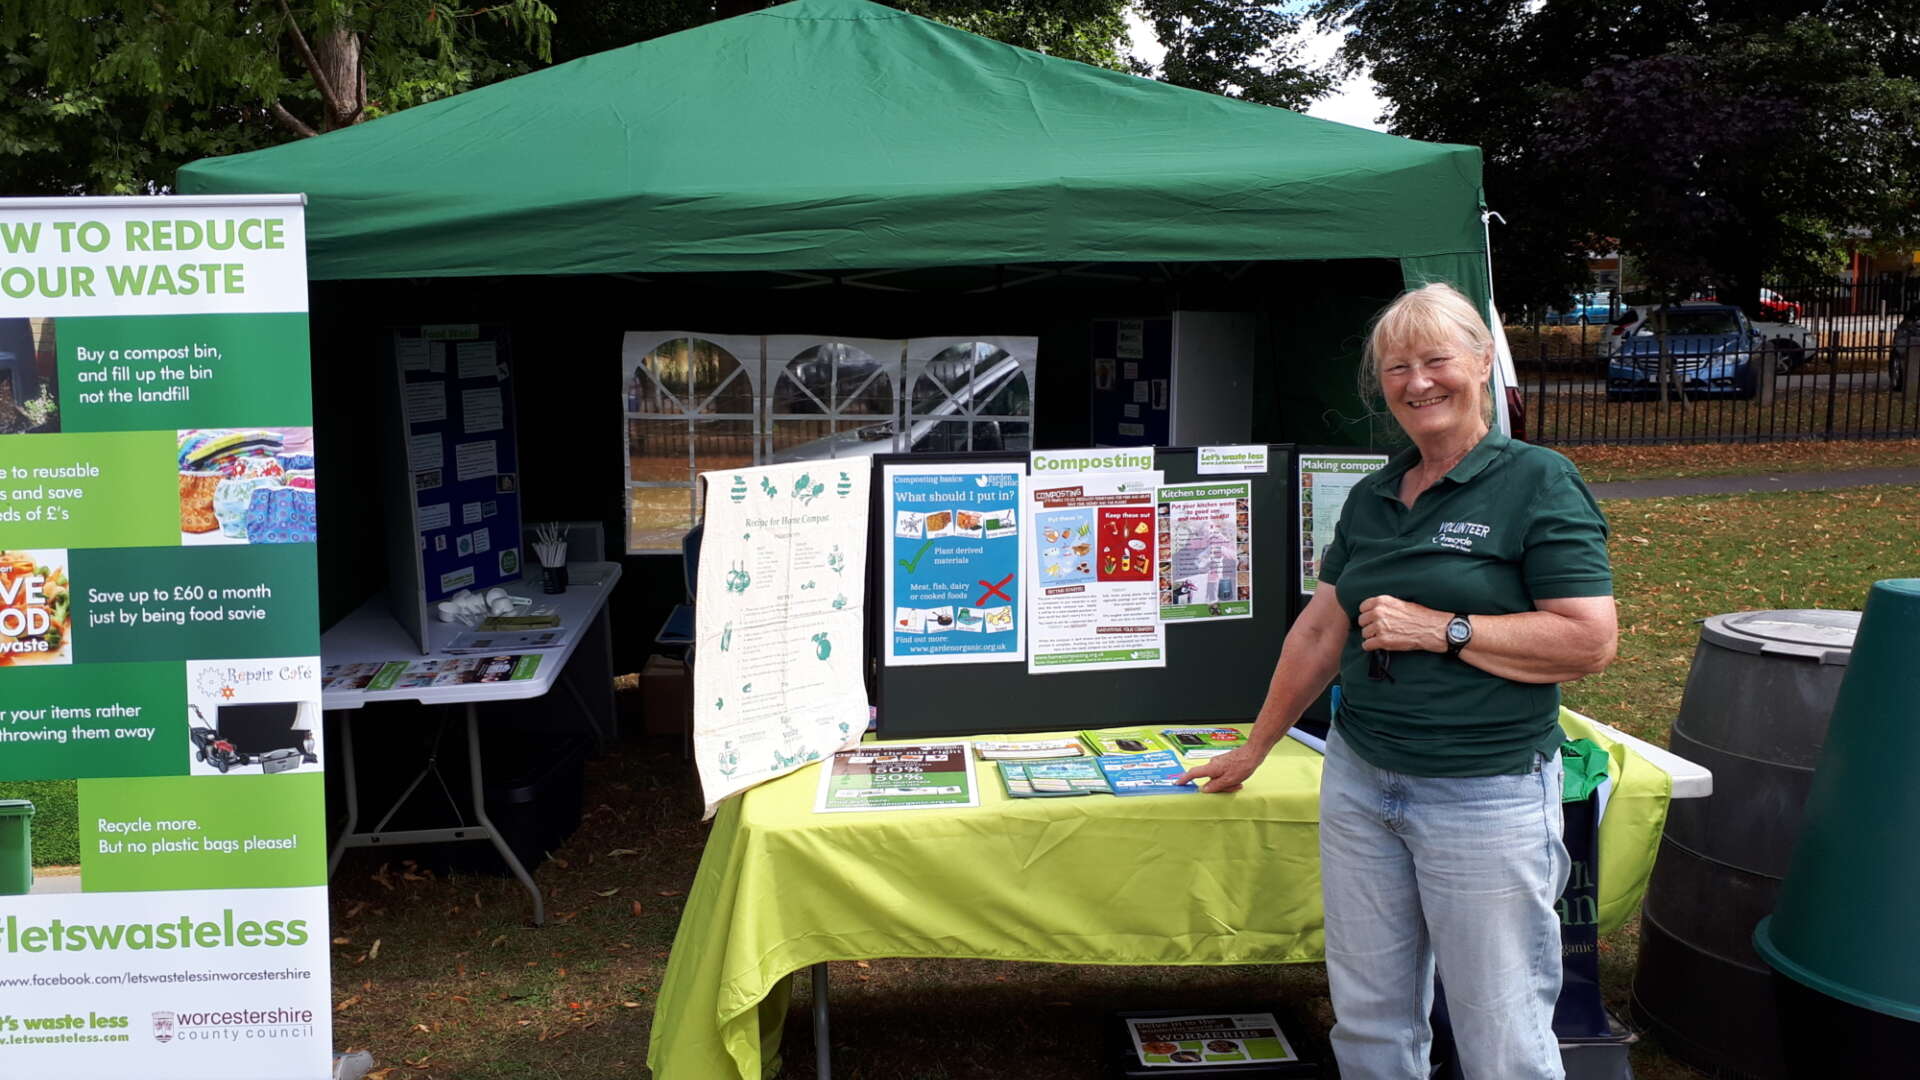 Stand at Master Composters event